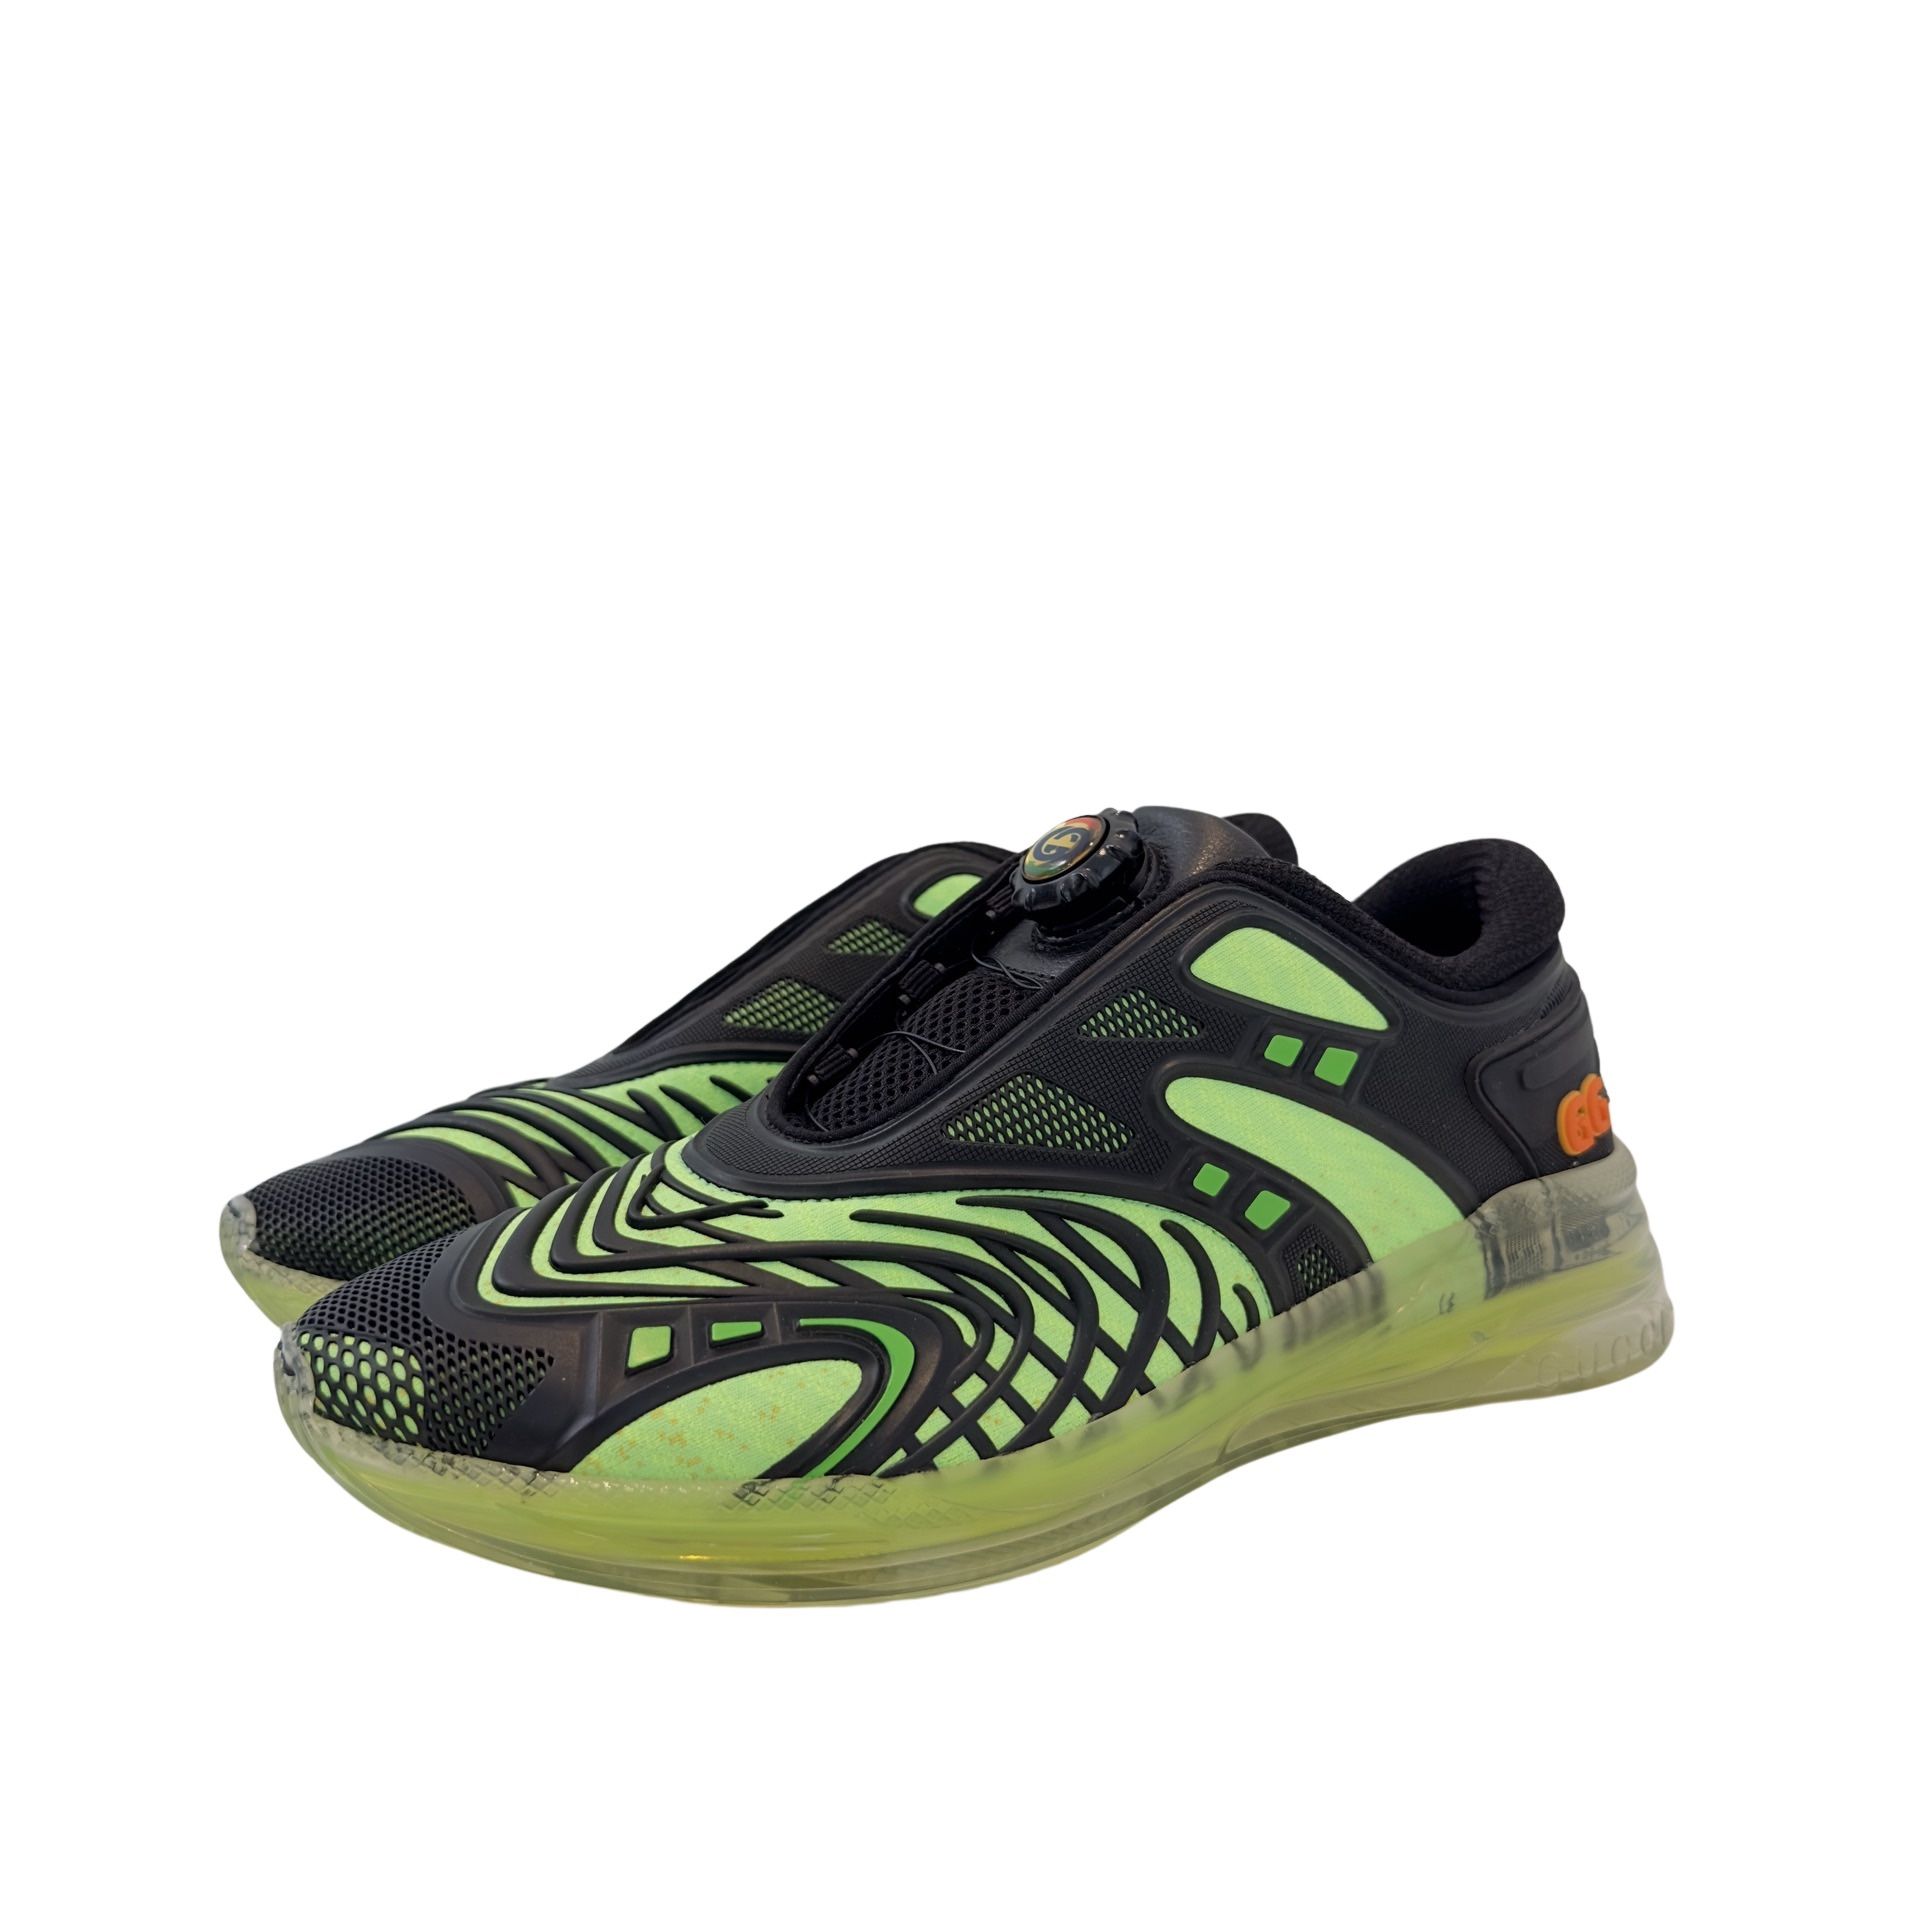 Gucci Ultrapace R Black Green Sneakers